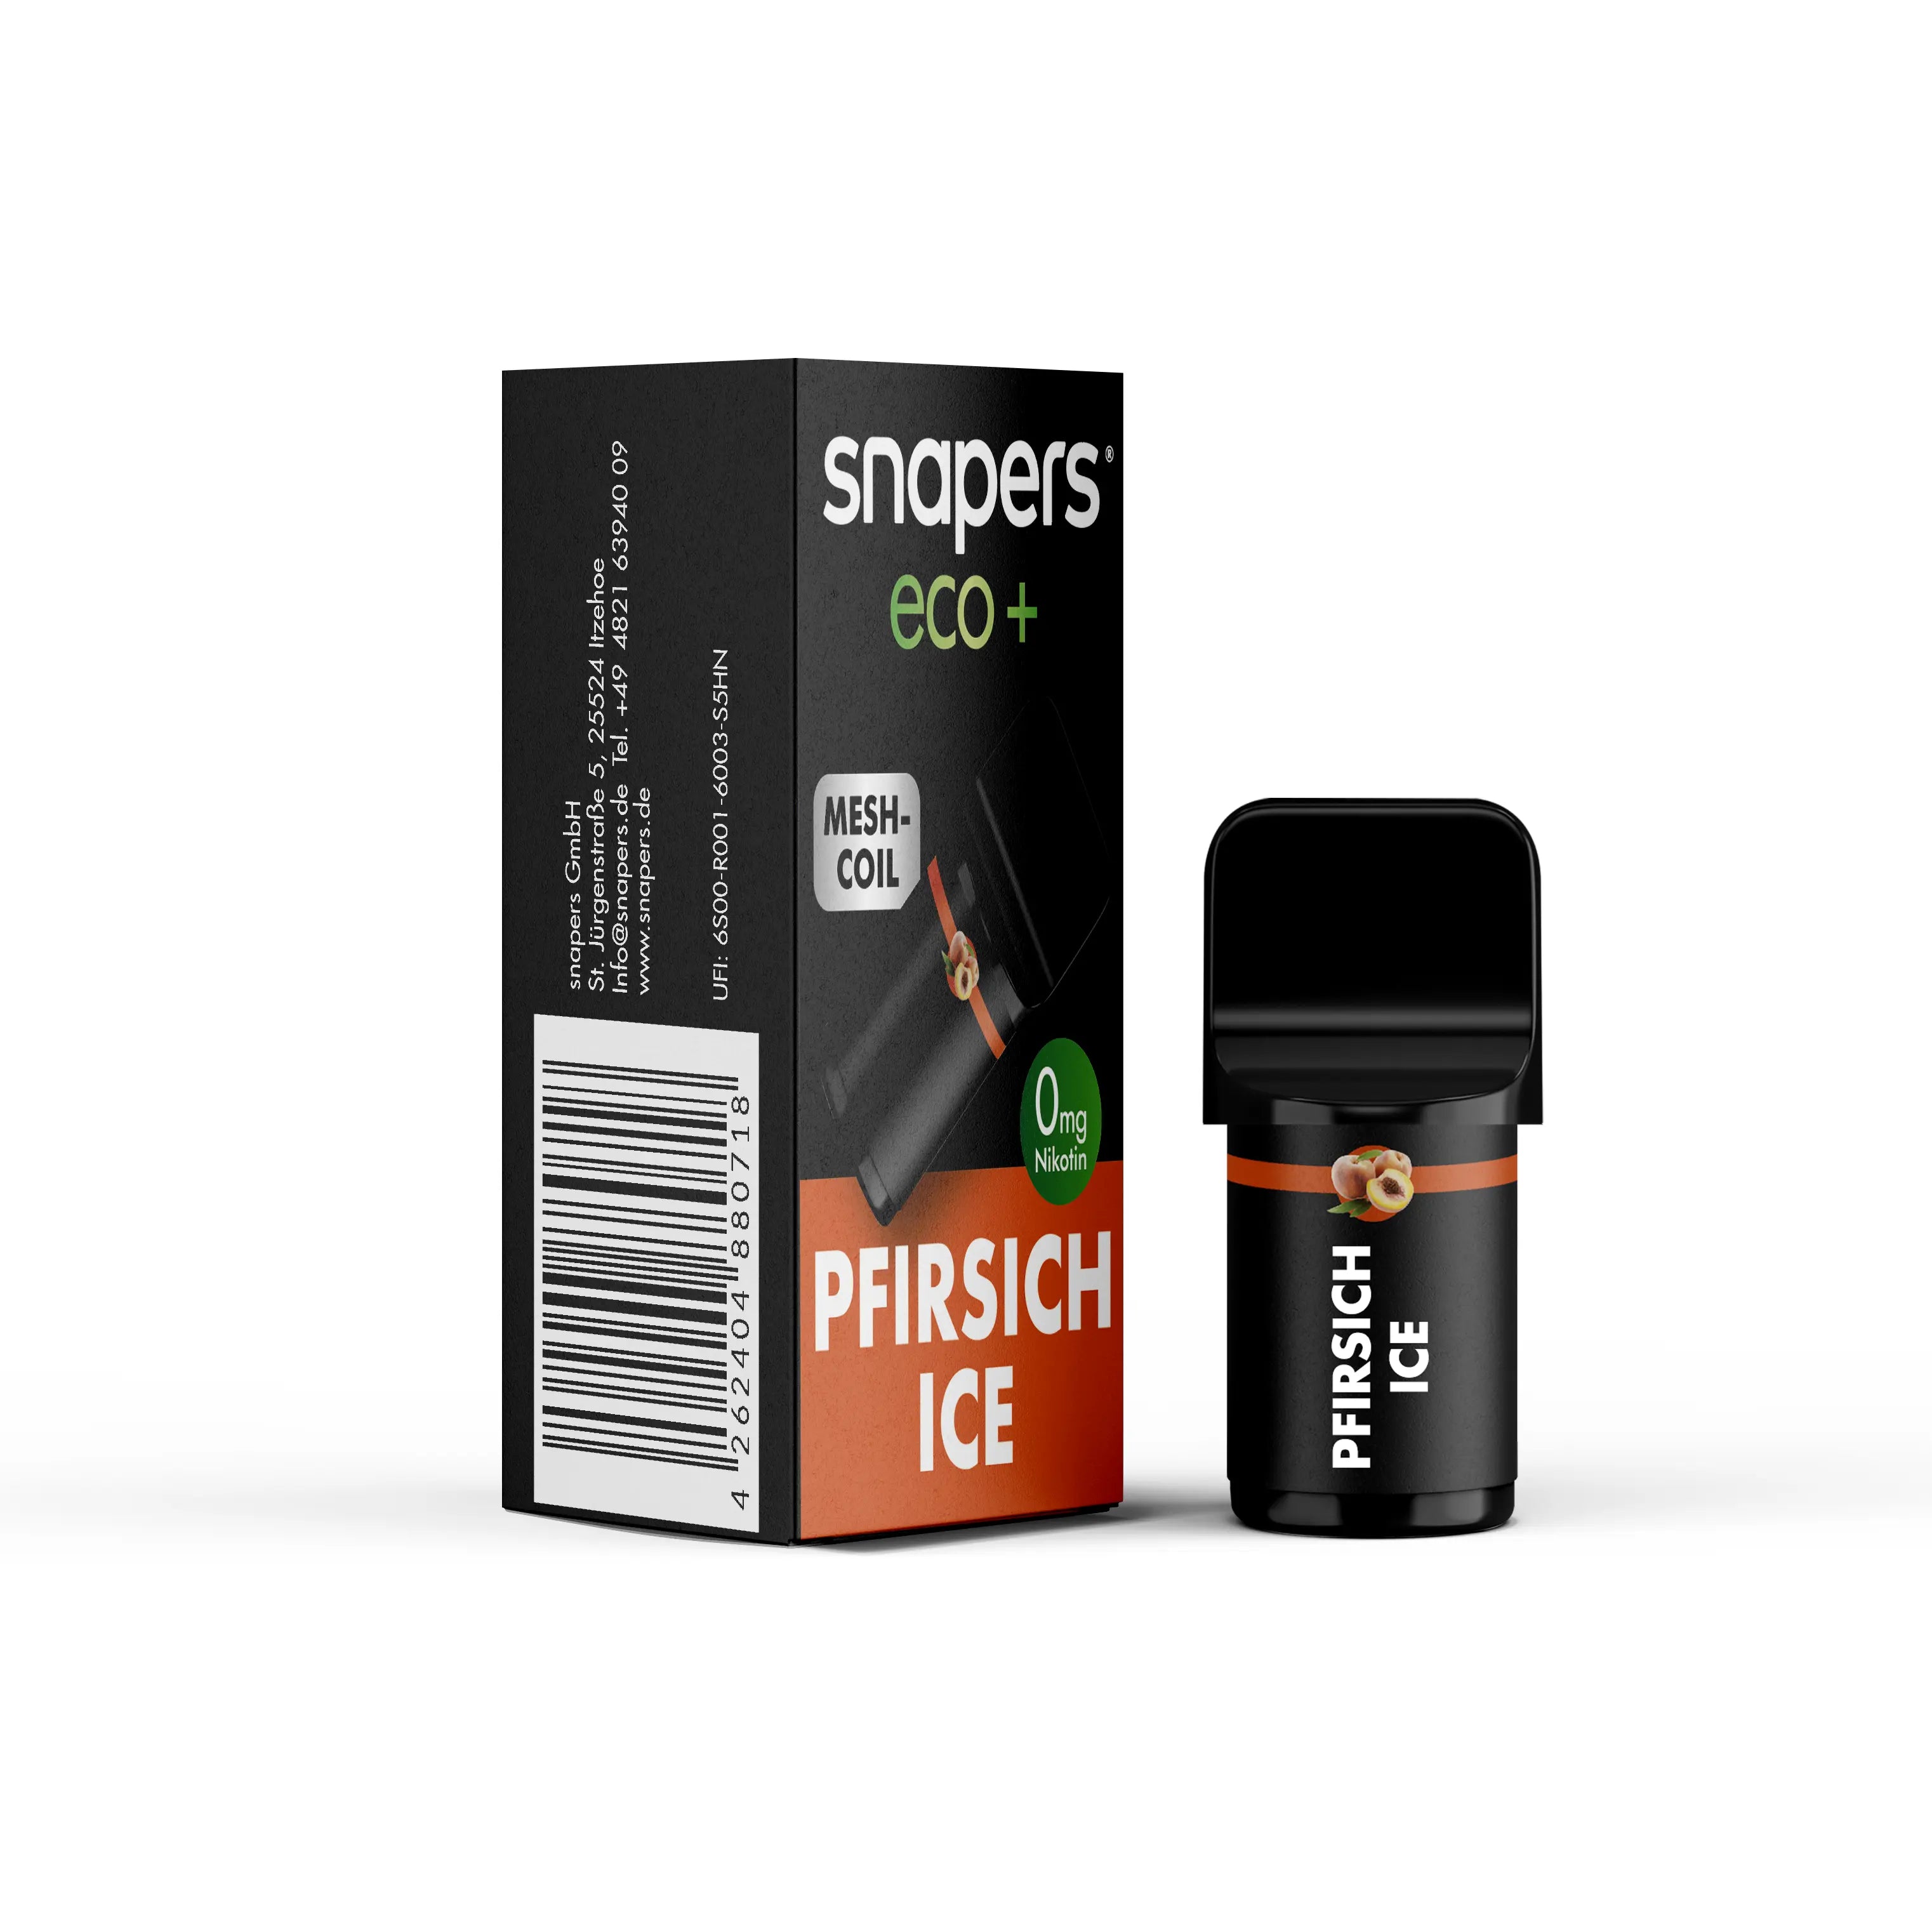 Snapers Eco+ 800 - Pfirsich Ice - OHNE NIKOTIN